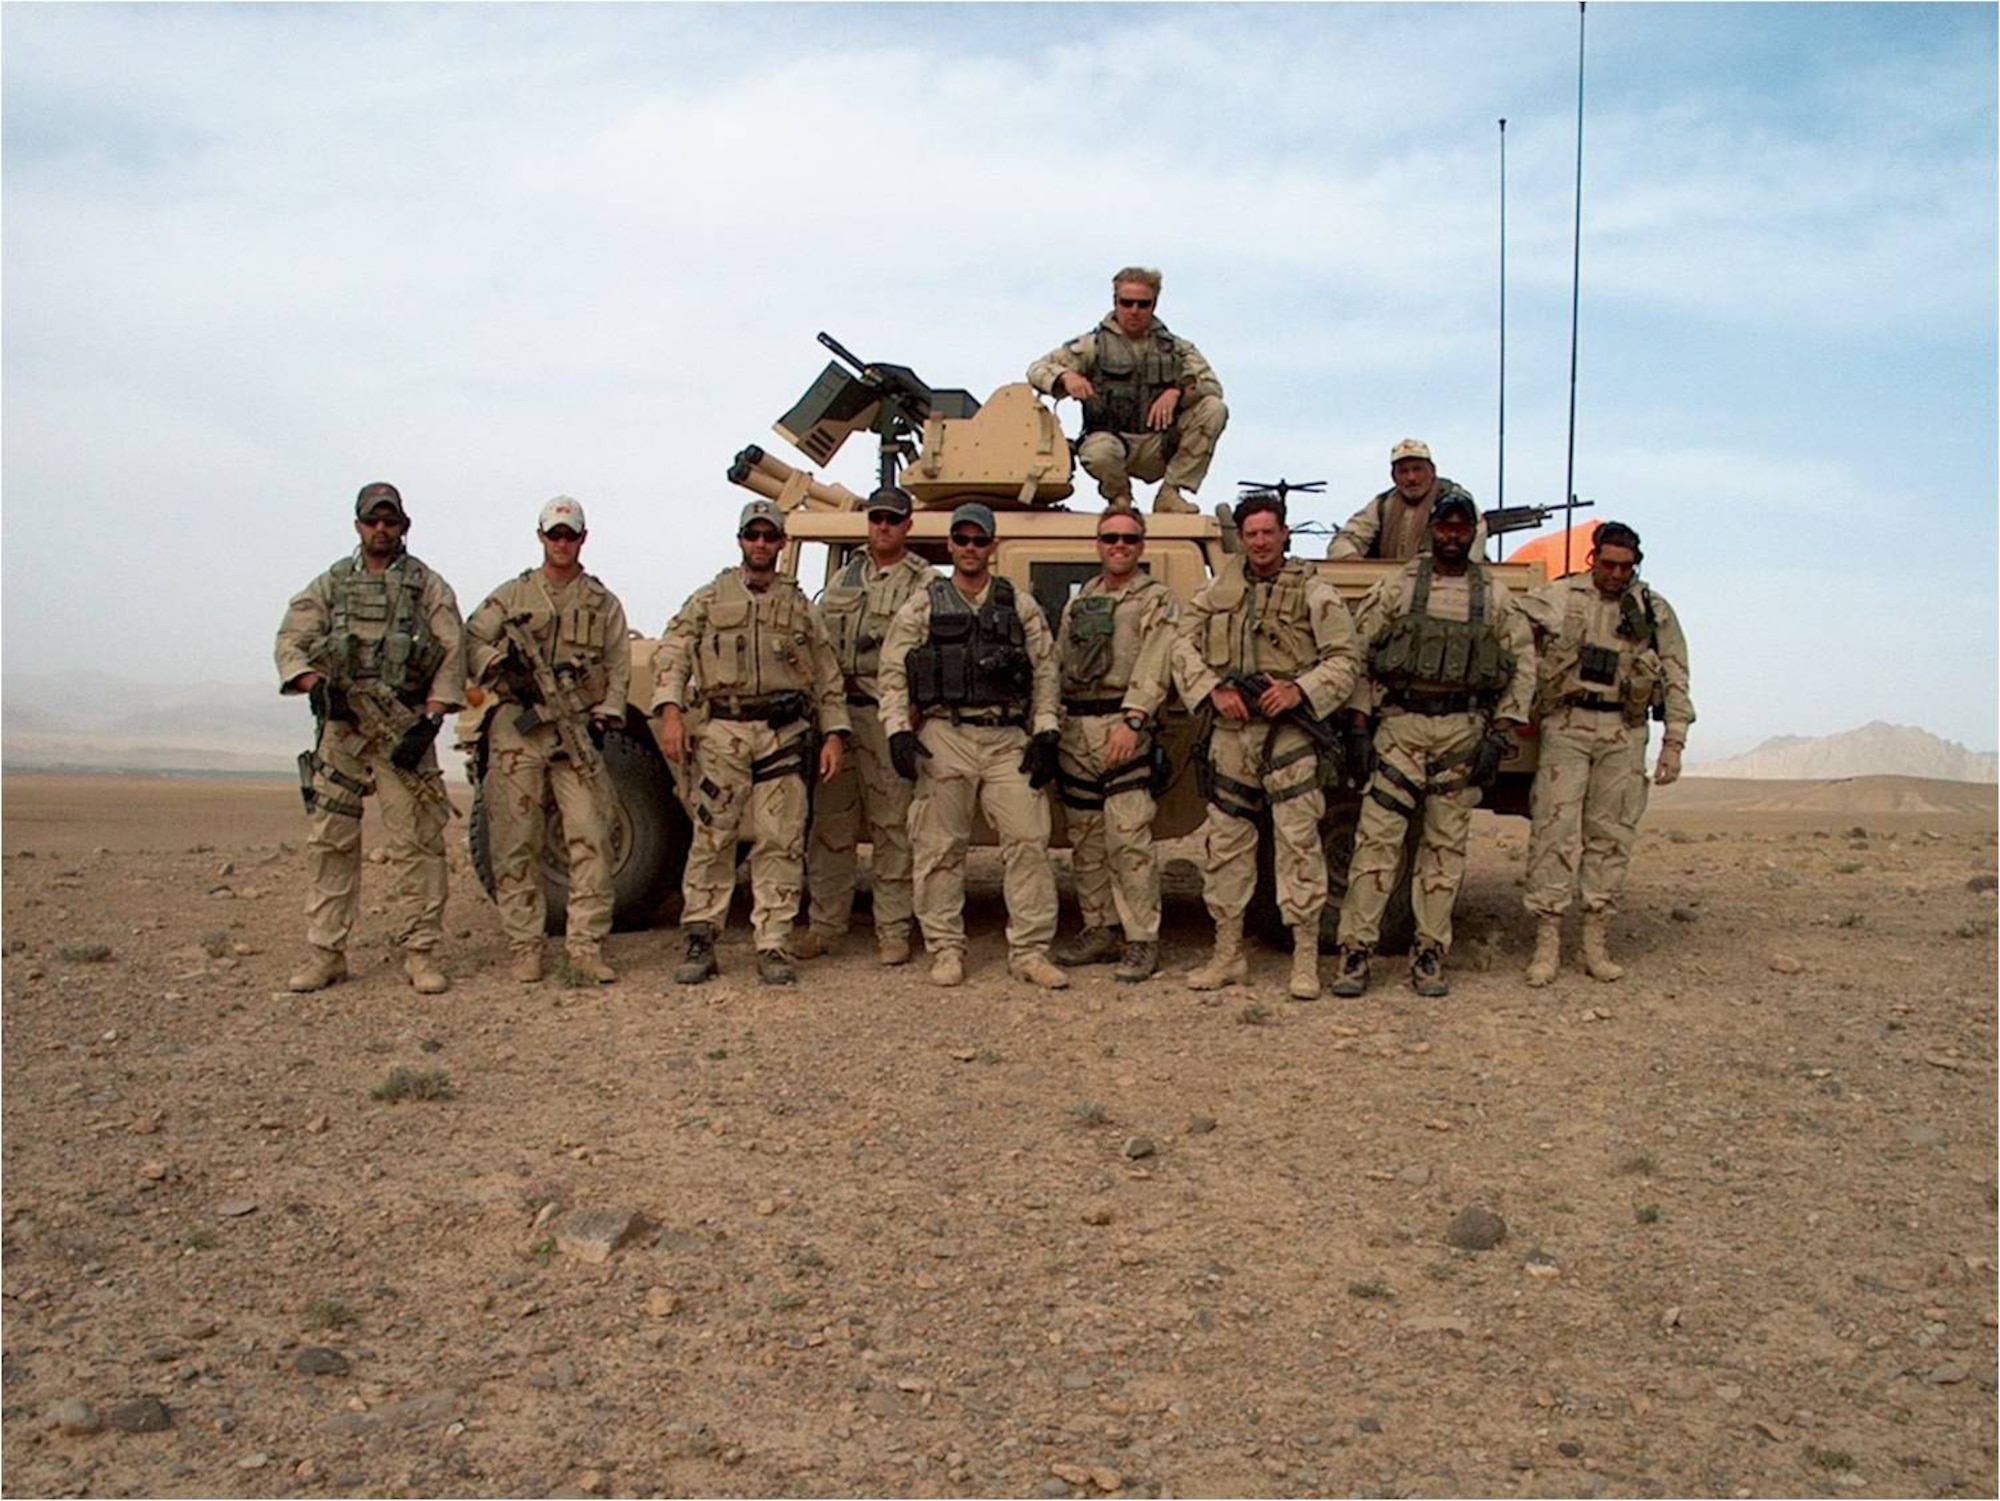 Special Forces team in Afghanistan. Tech. Sgt. Kevin Whalen is first on the left, wearing the cap now on display at the National Museum of the United States Air Force. (U.S. Air Force photo)